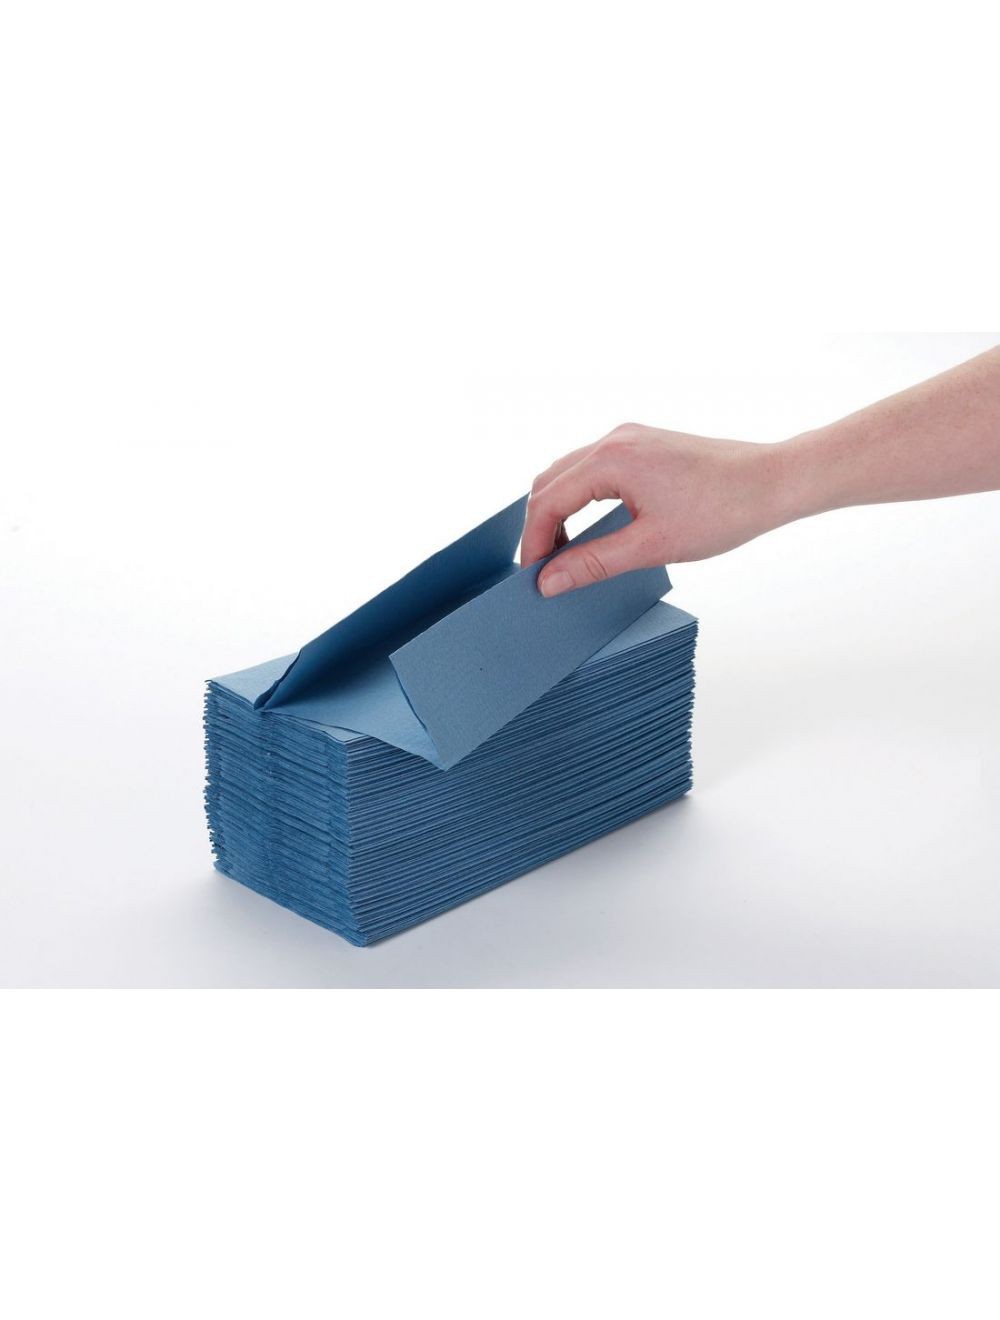 Paperstation+C+Fold+Hand+Towel+1+Ply+Blue+Box+2850